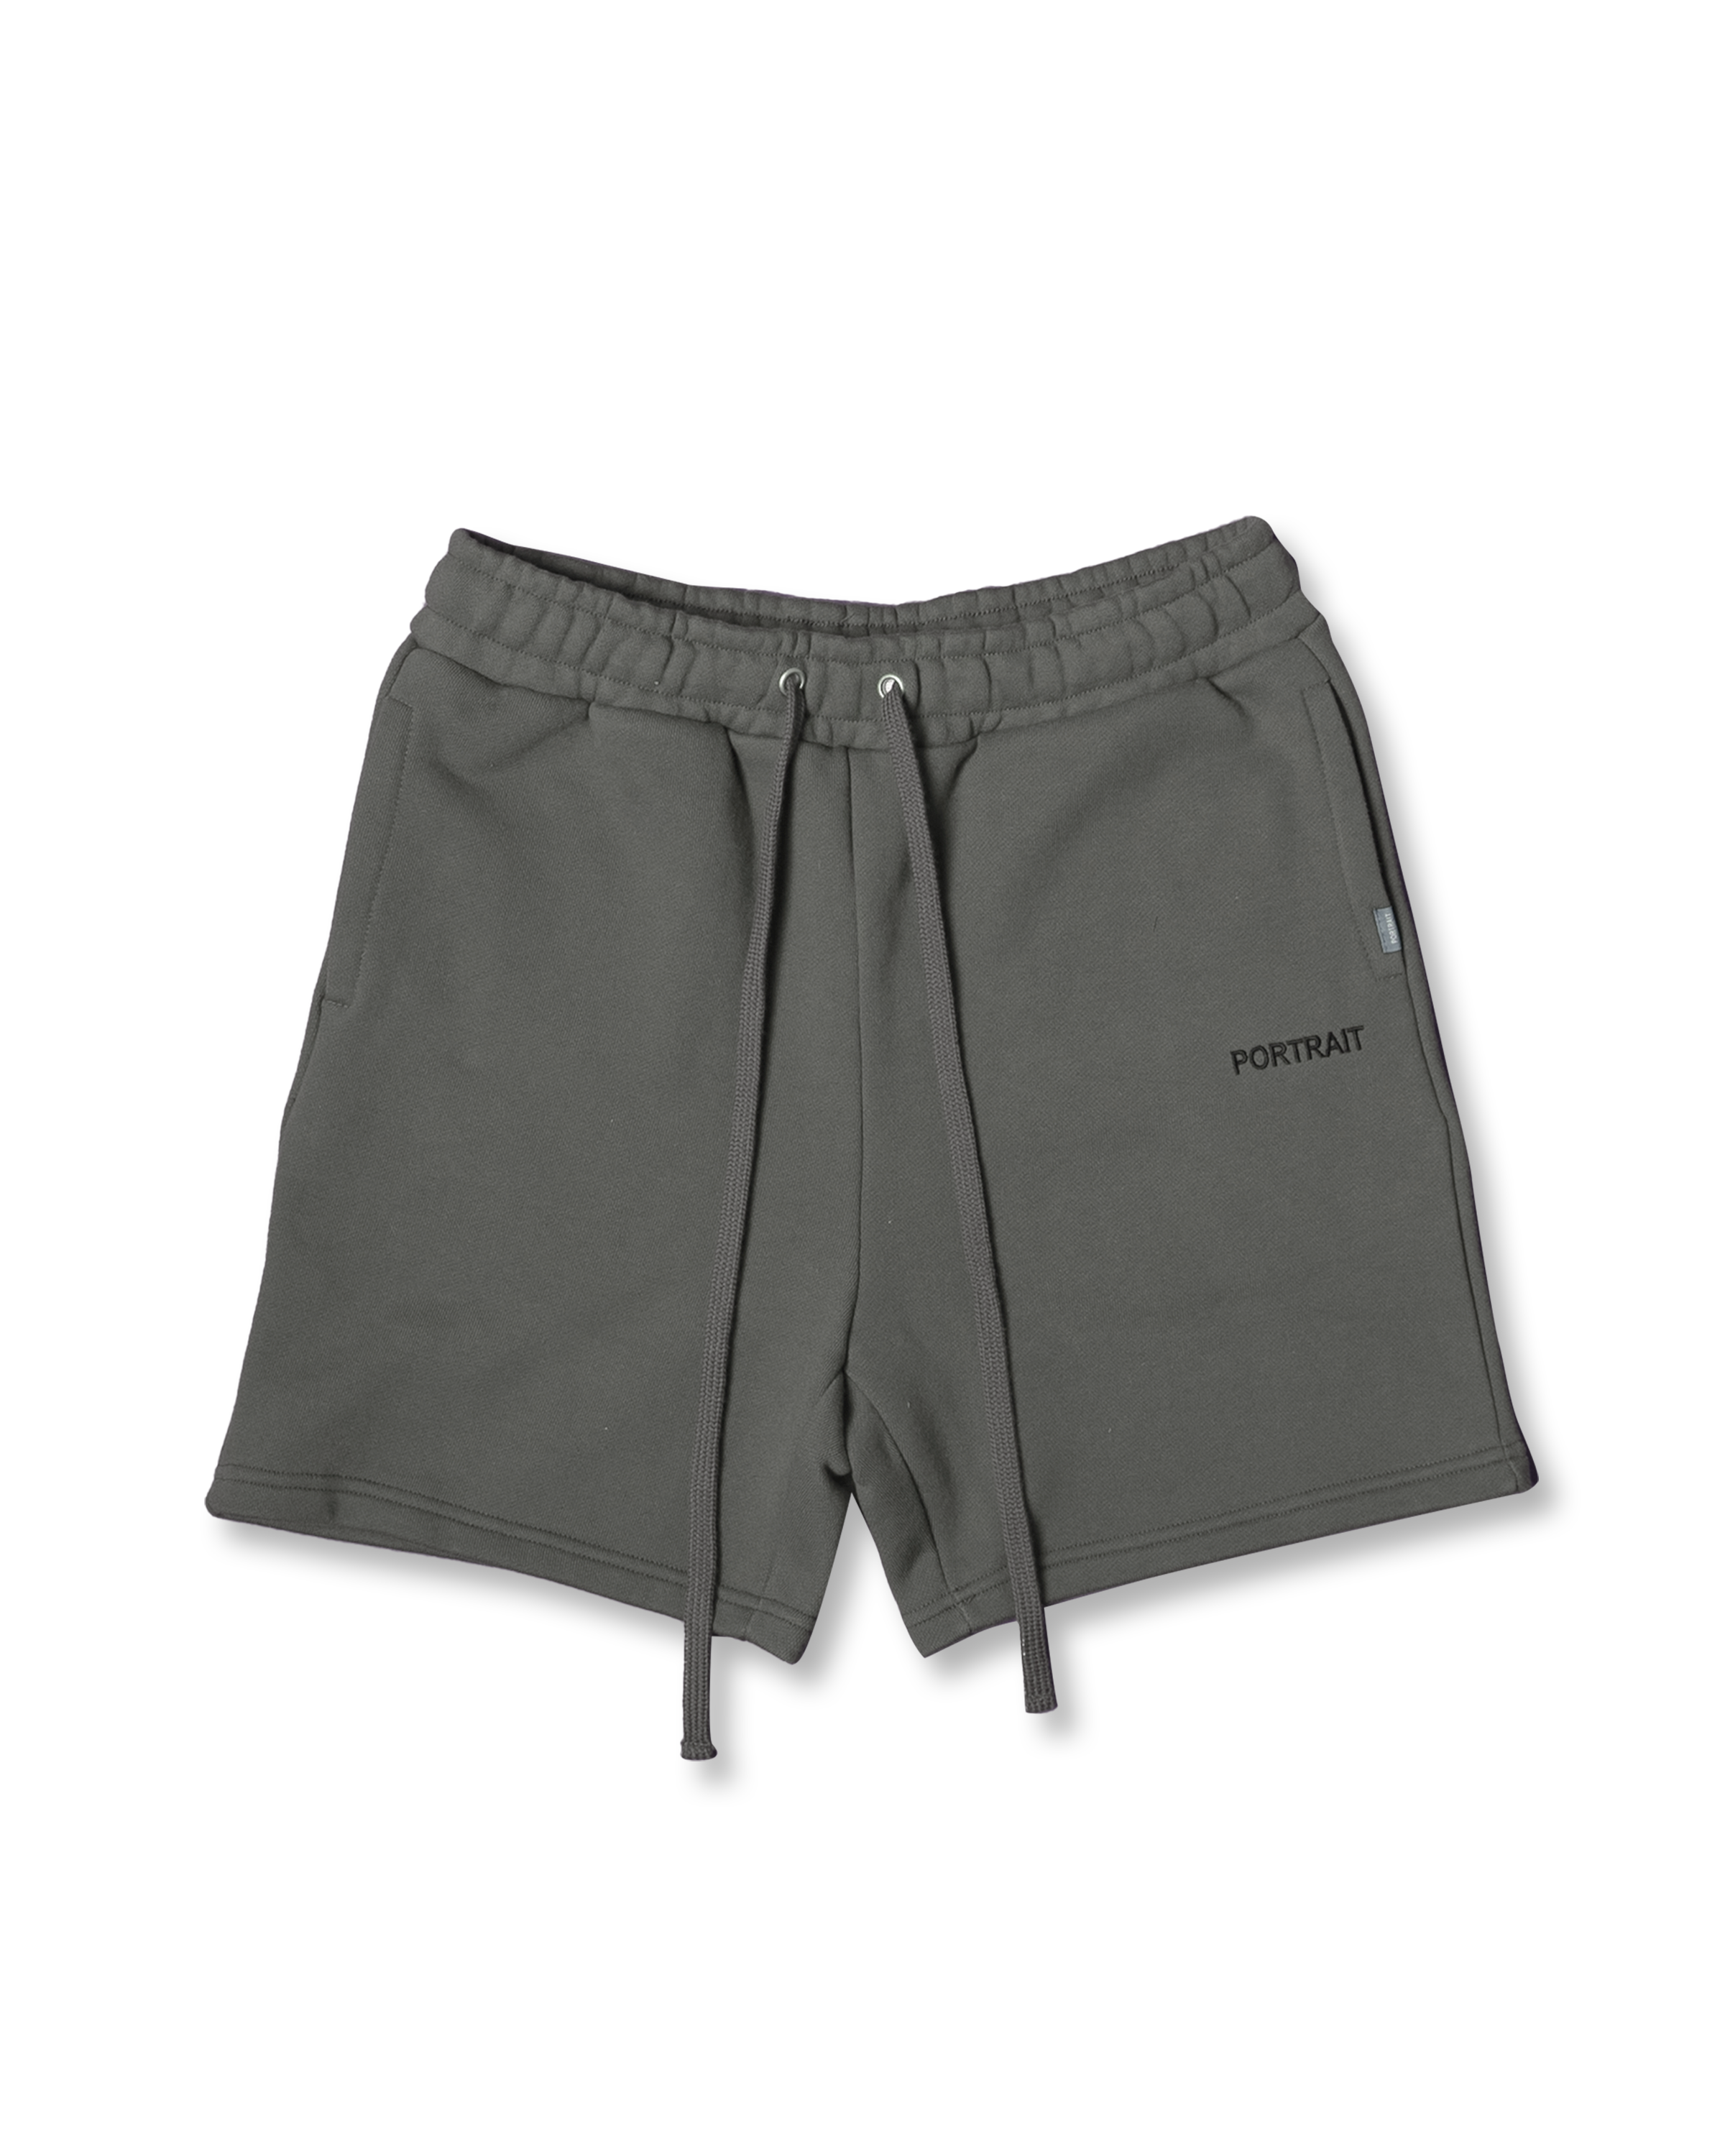 PTR Charcoal Sweat Shorts